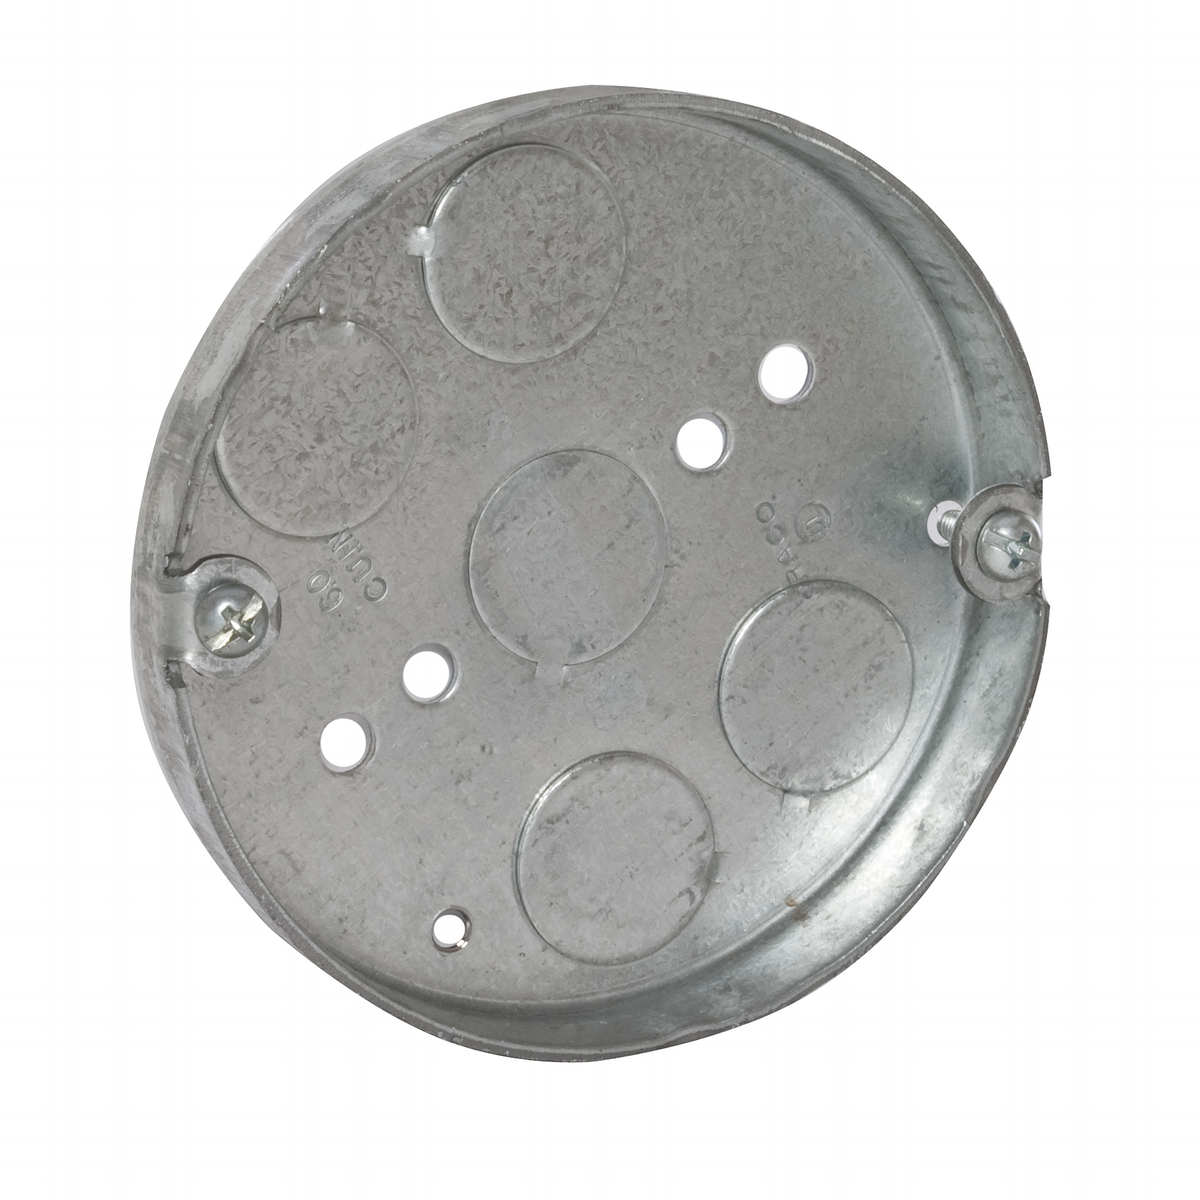 RACO 293 4" ROUND CEILING PAN, 1/2" DEEP, 1/2" BOTTOM KNOCKOUT